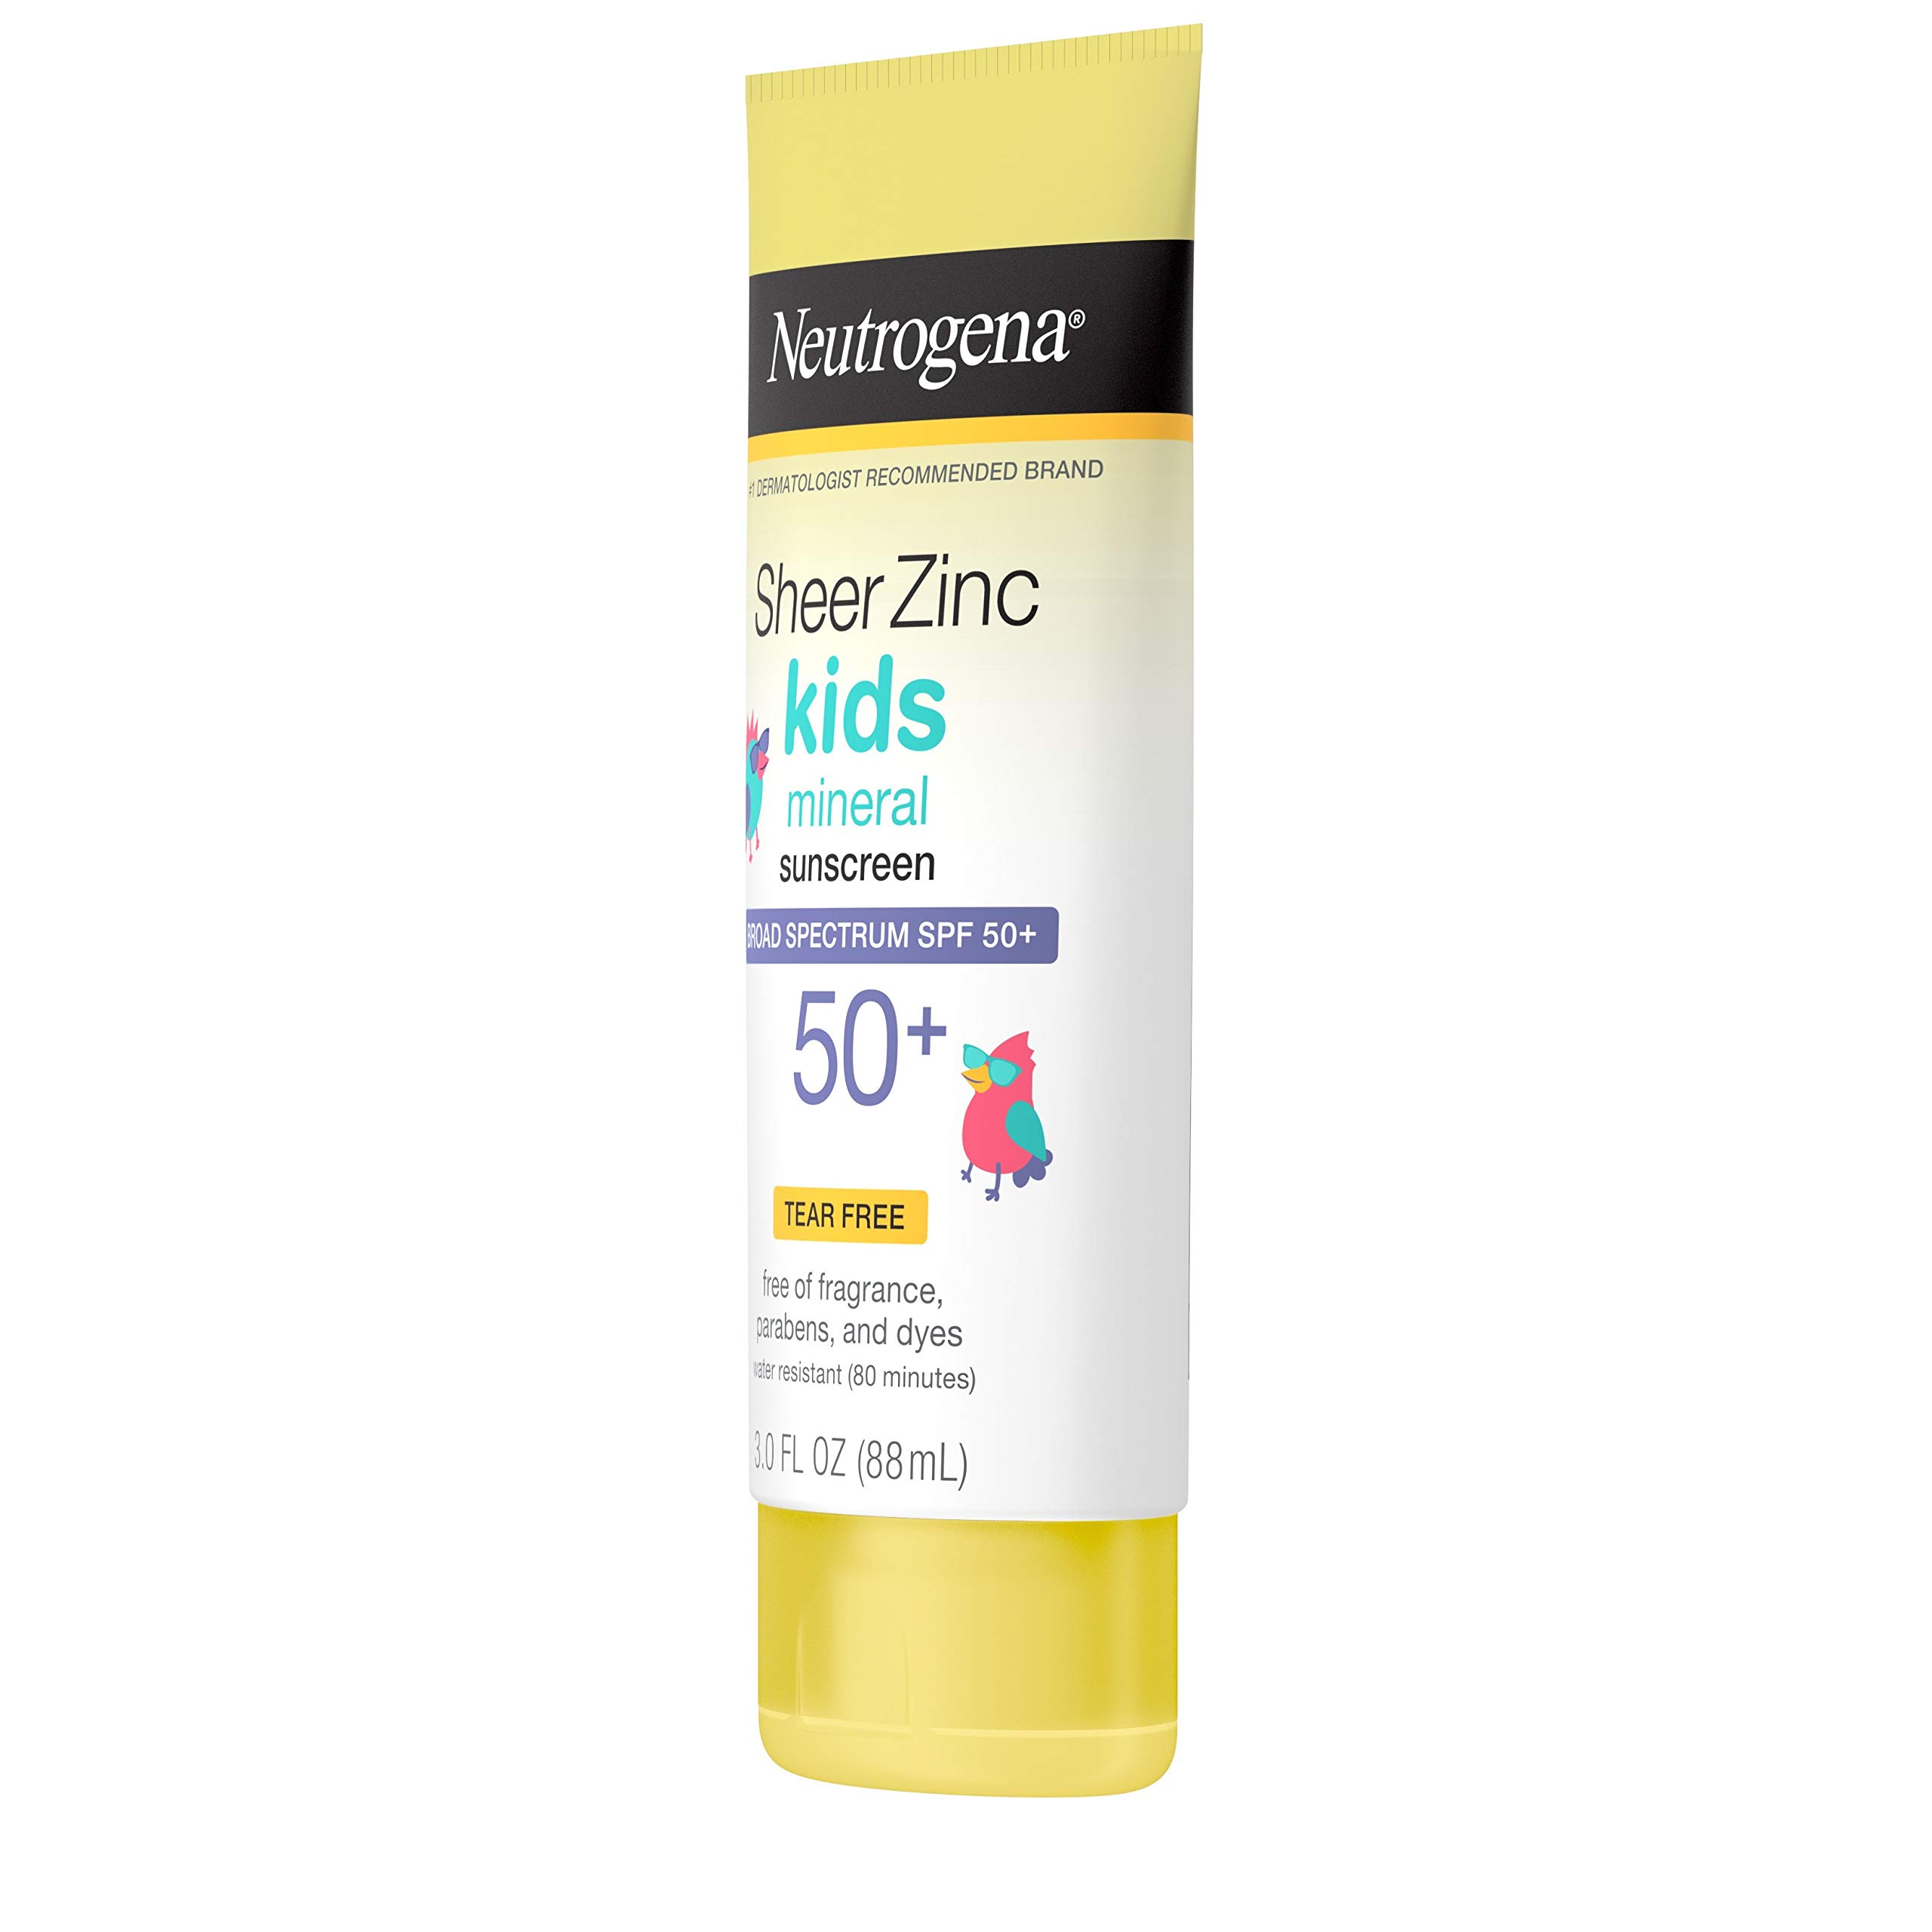 Neutrogena Sheer Zinc Oxide Kids Mineral Sunscreen Lotion, Broad Spectrum SPF 50+ with UVA/UVB Protection, Water-Resistant for 80 Minutes, Paraben-, Dye-, Fragrance- & Tear Free, 3 fl. oz